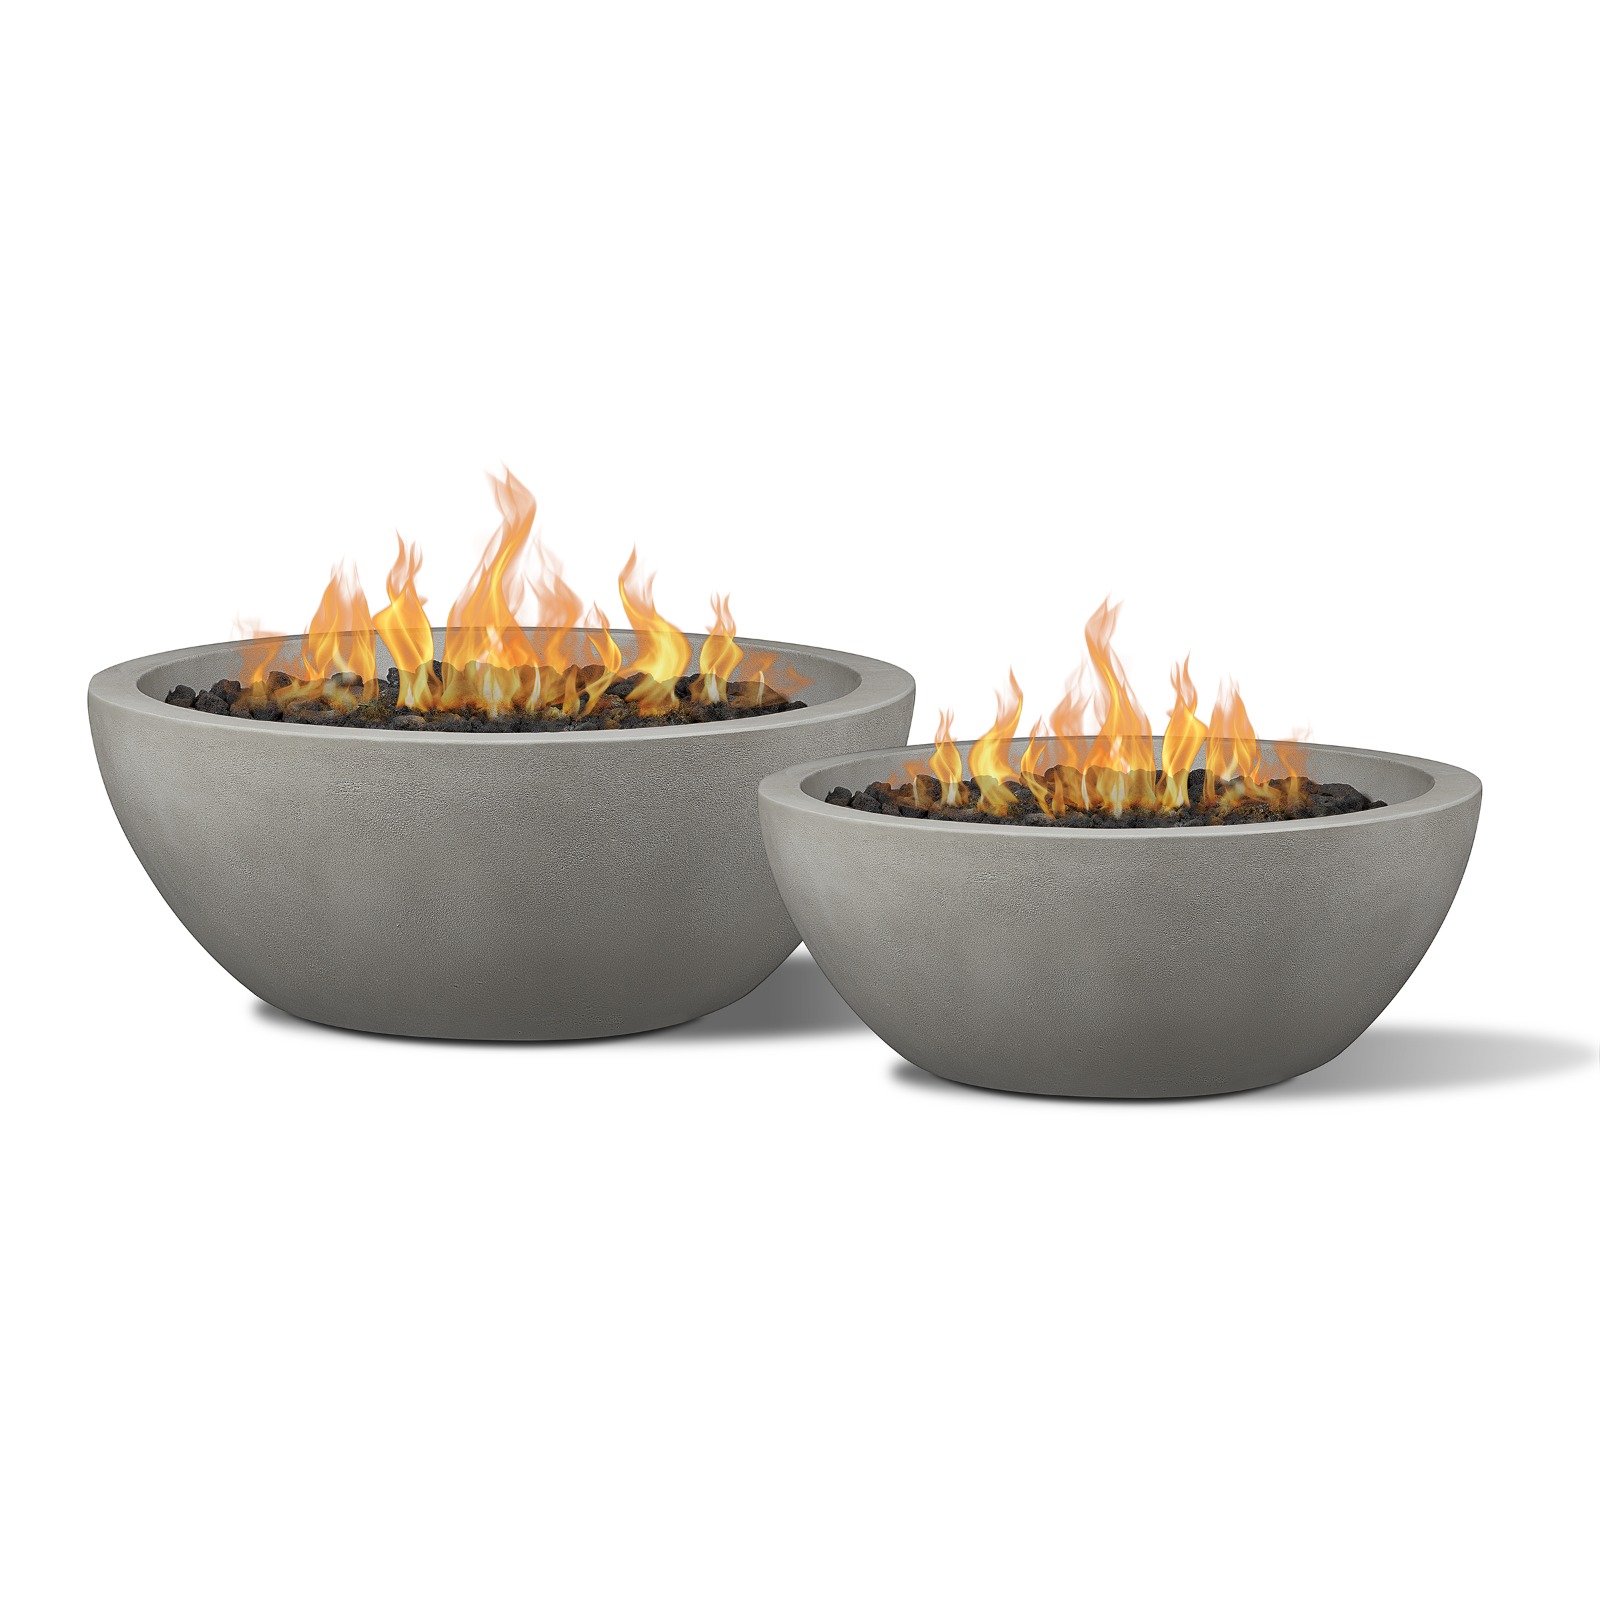 Eldora 42" GFRC Propane Fire Pit Natural Gas Fire Bowl Outdoor Fireplace Fire Table for Backyard or Patio